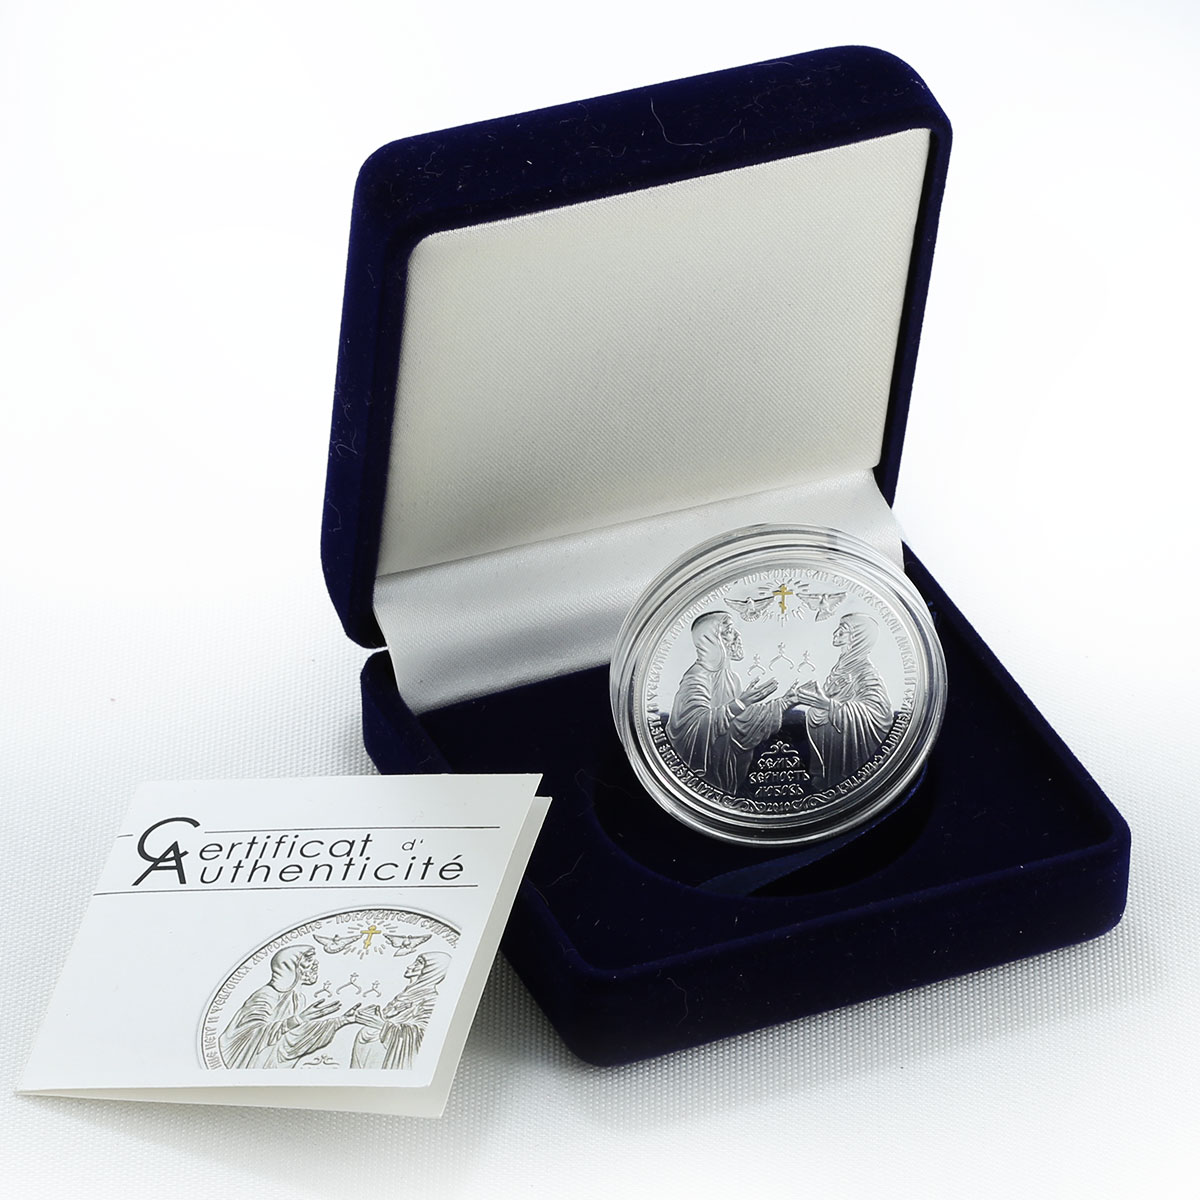 Congo 1000 francs Peter and Phewa religion faith silver coin 2010